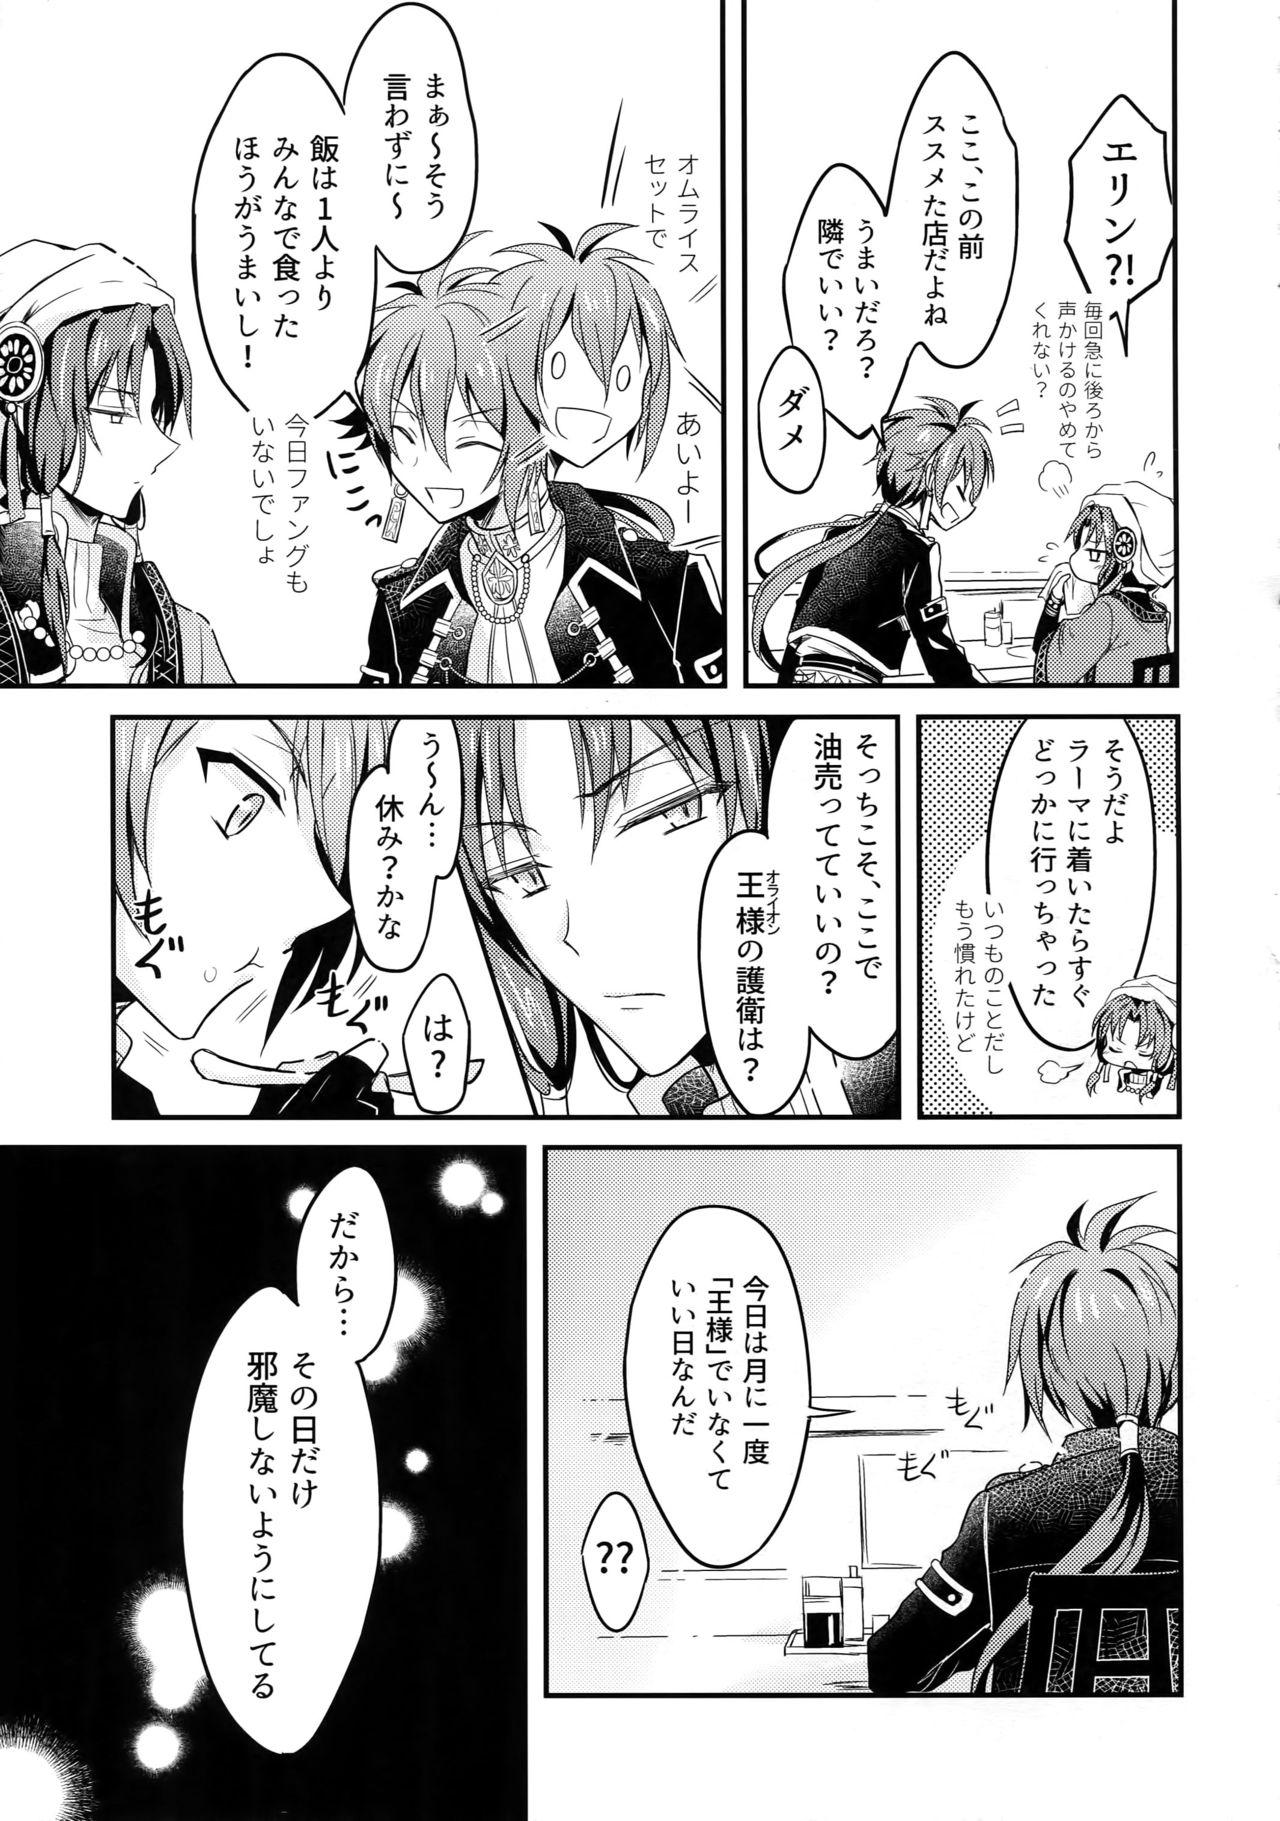 Delicia Top Secret - Idolish7 Teasing - Page 4